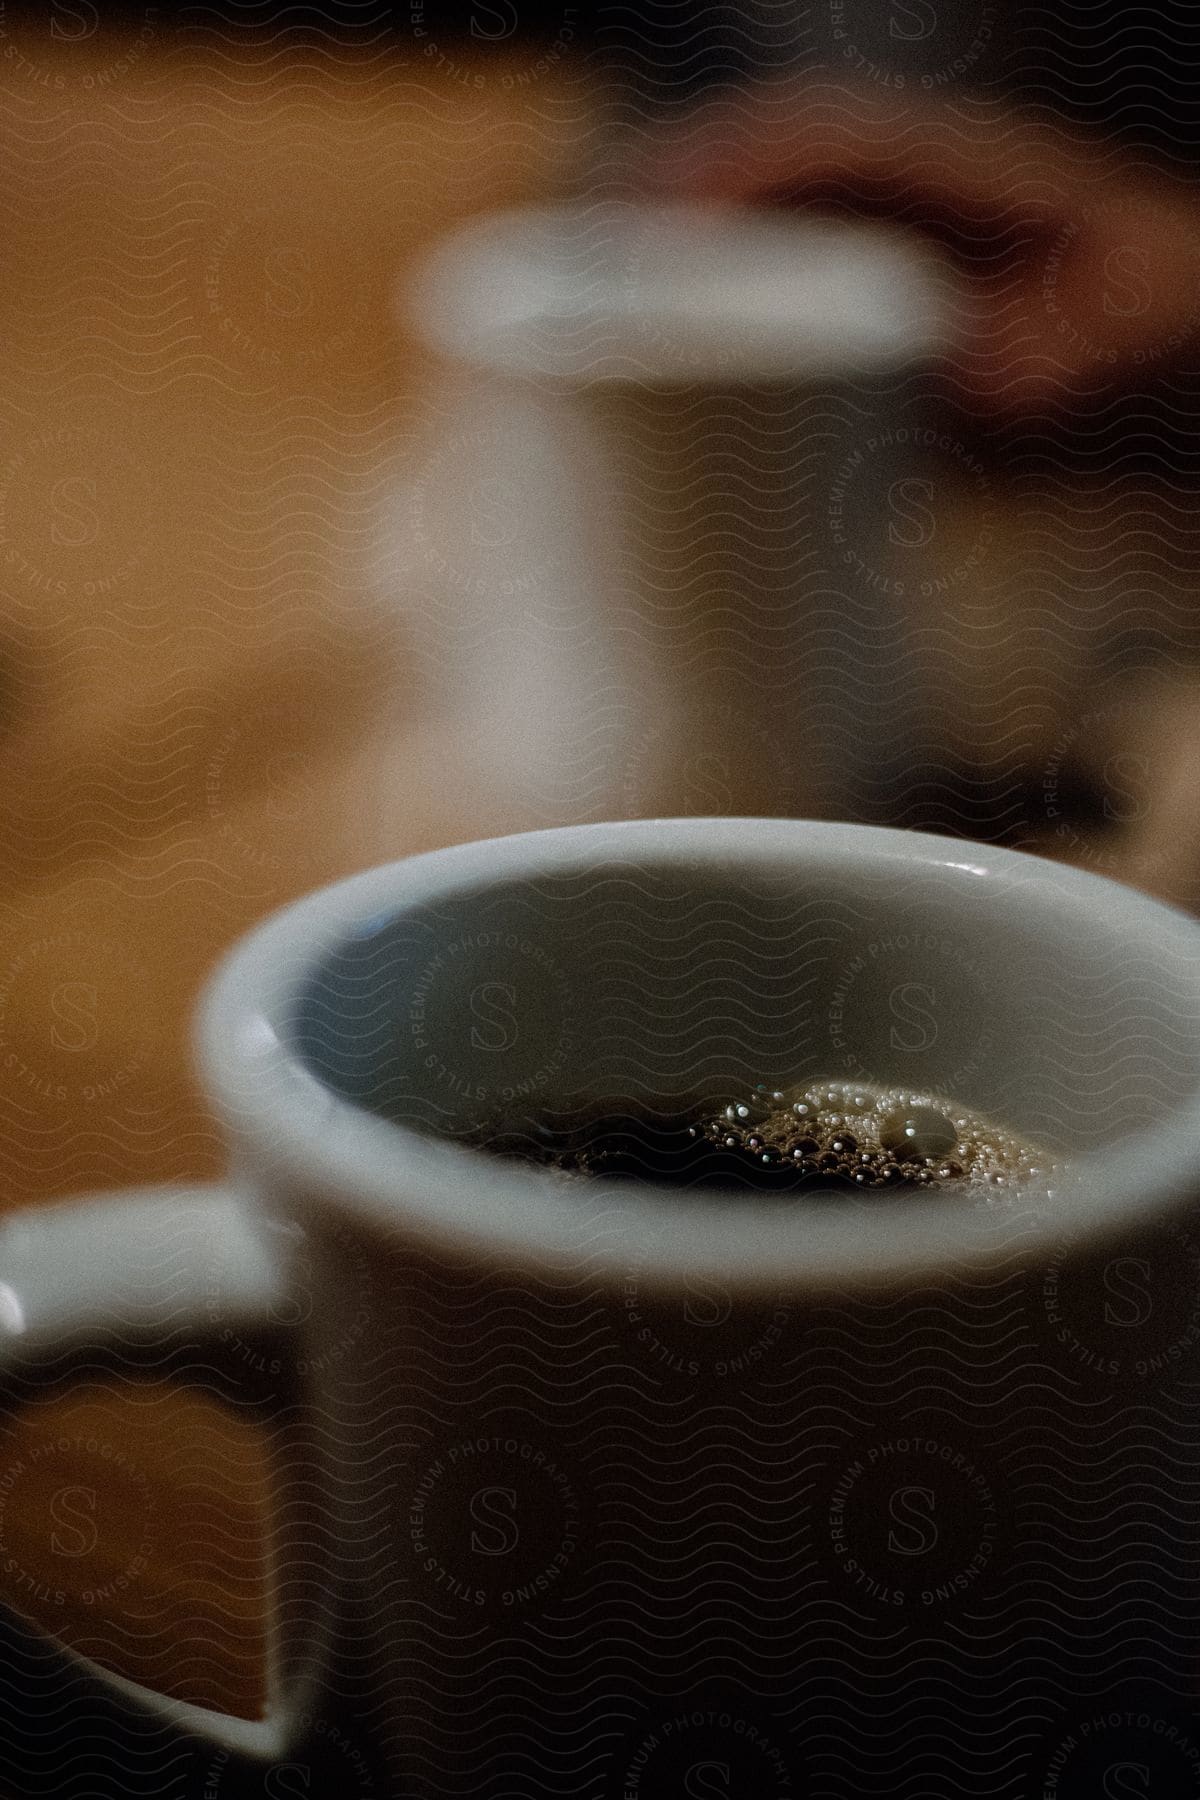 A coffee cup on a table